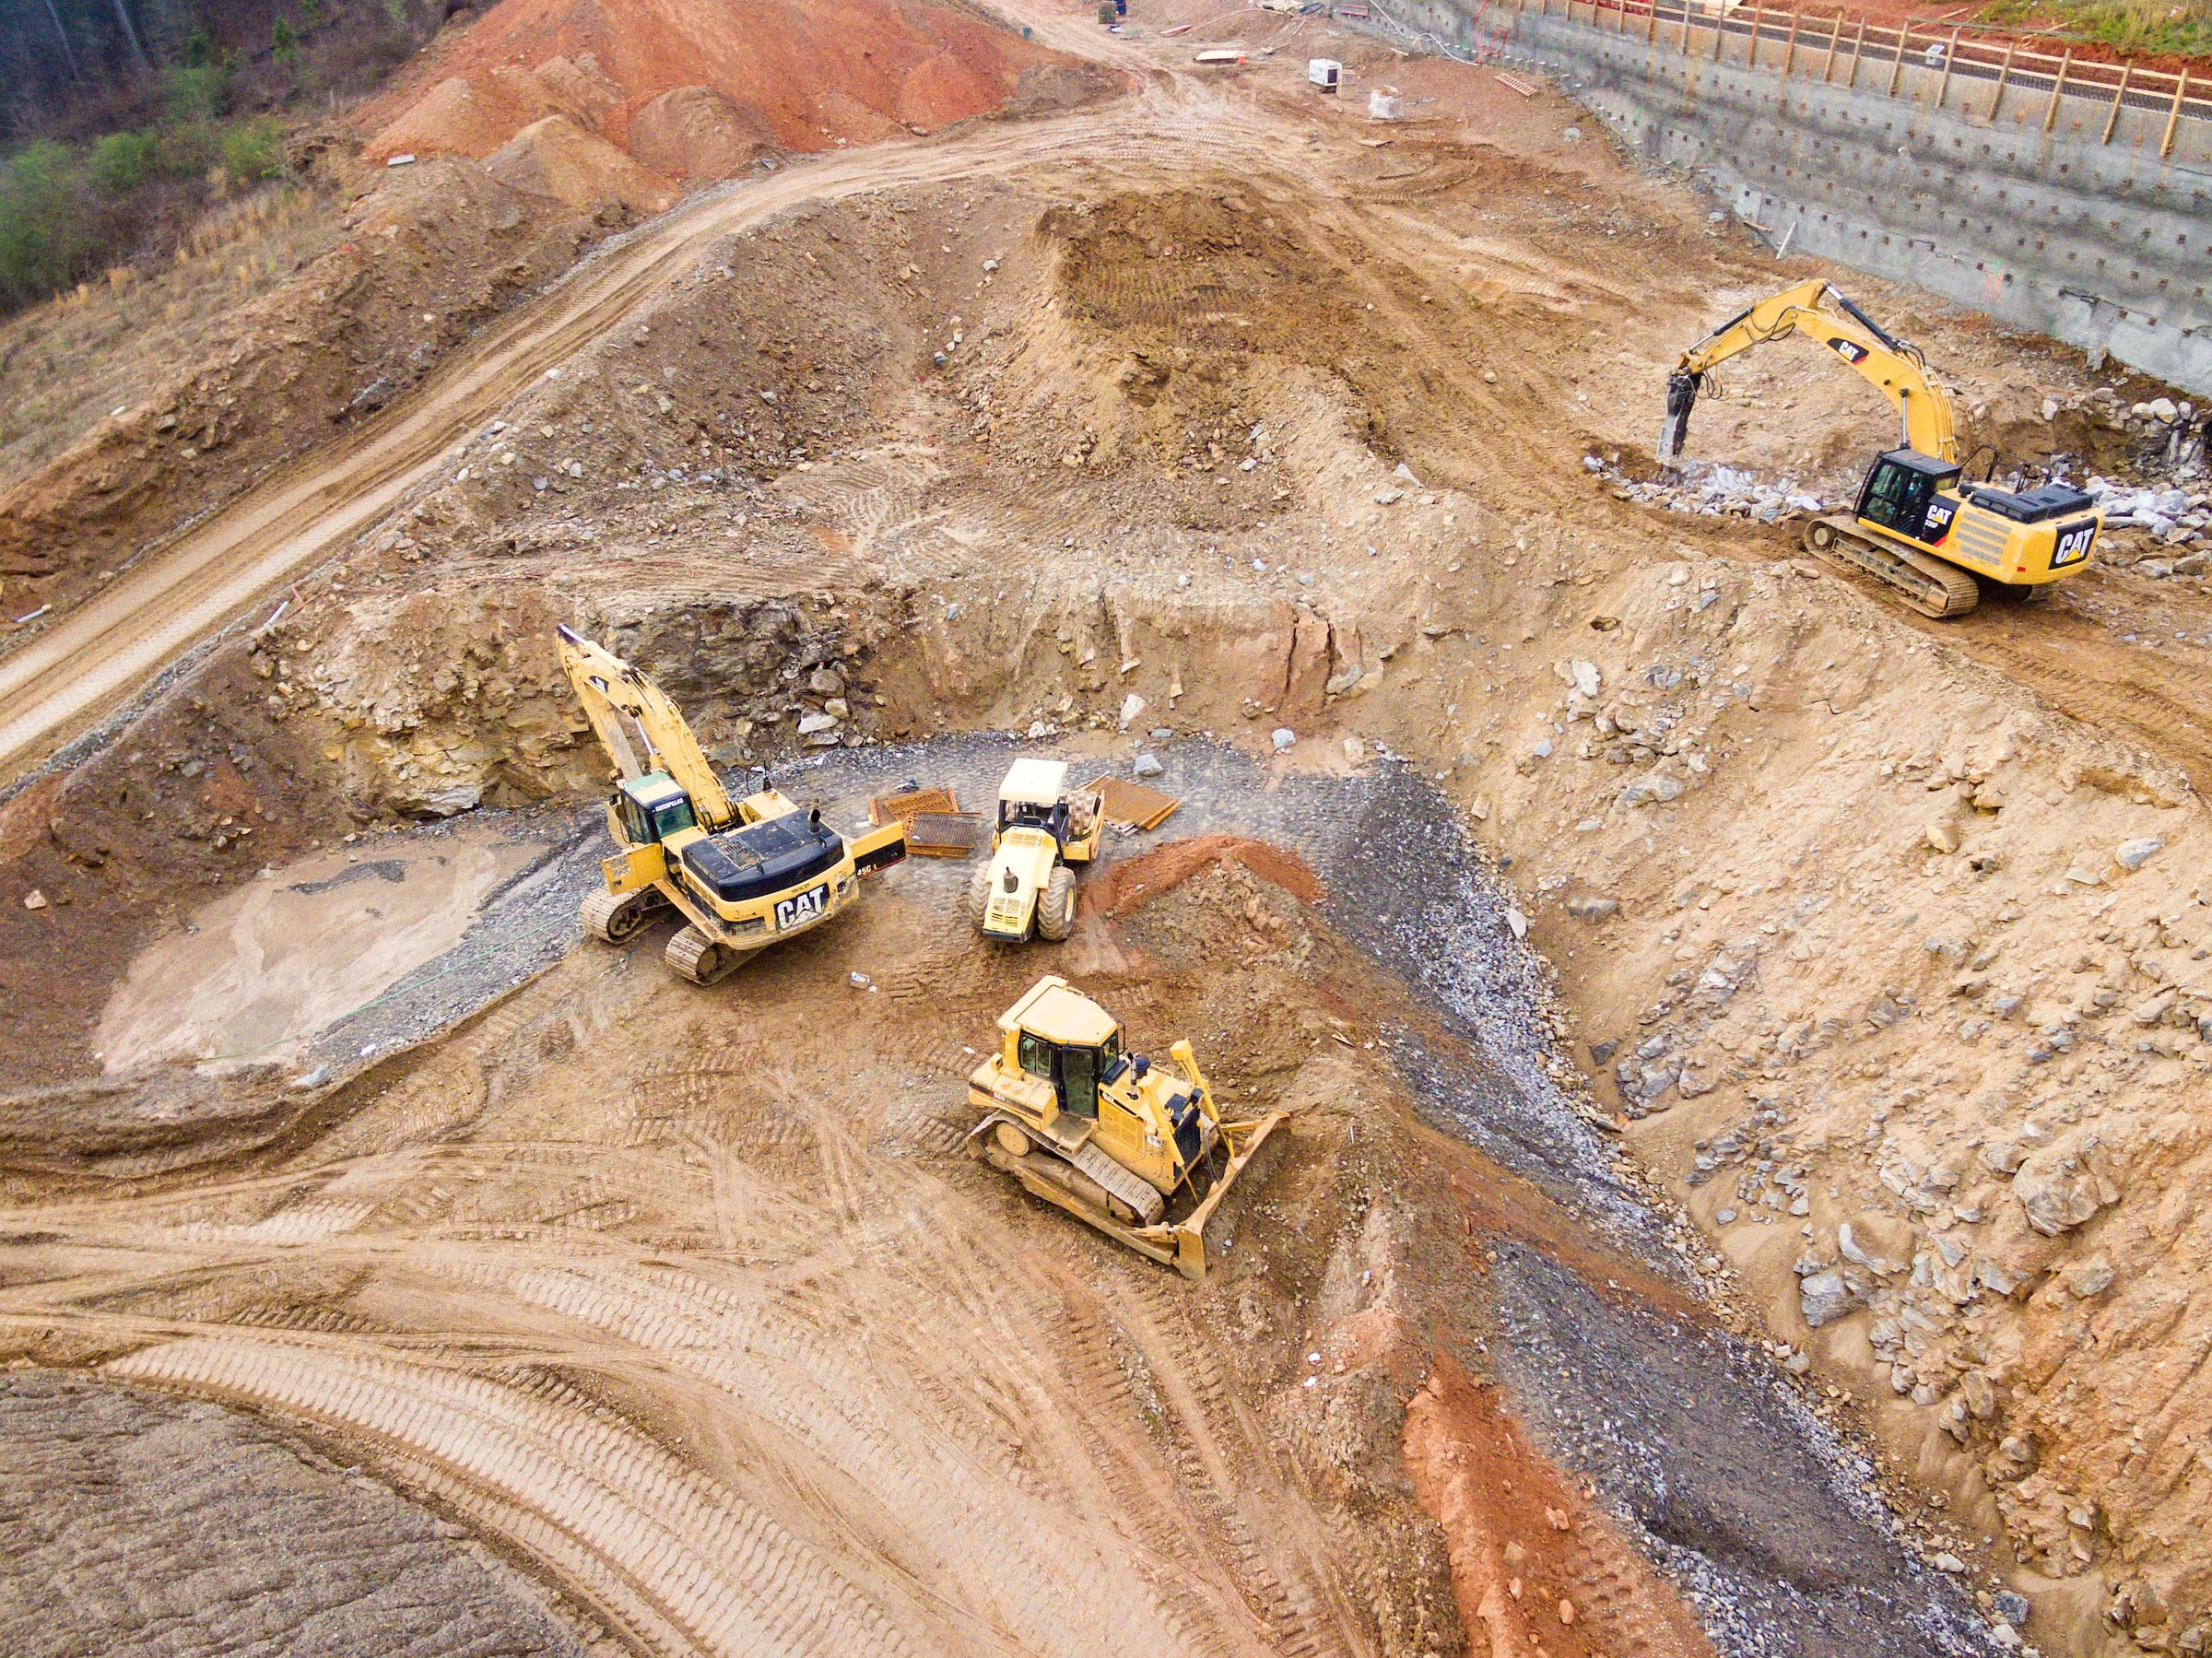 arial view of a mine site with machinery working